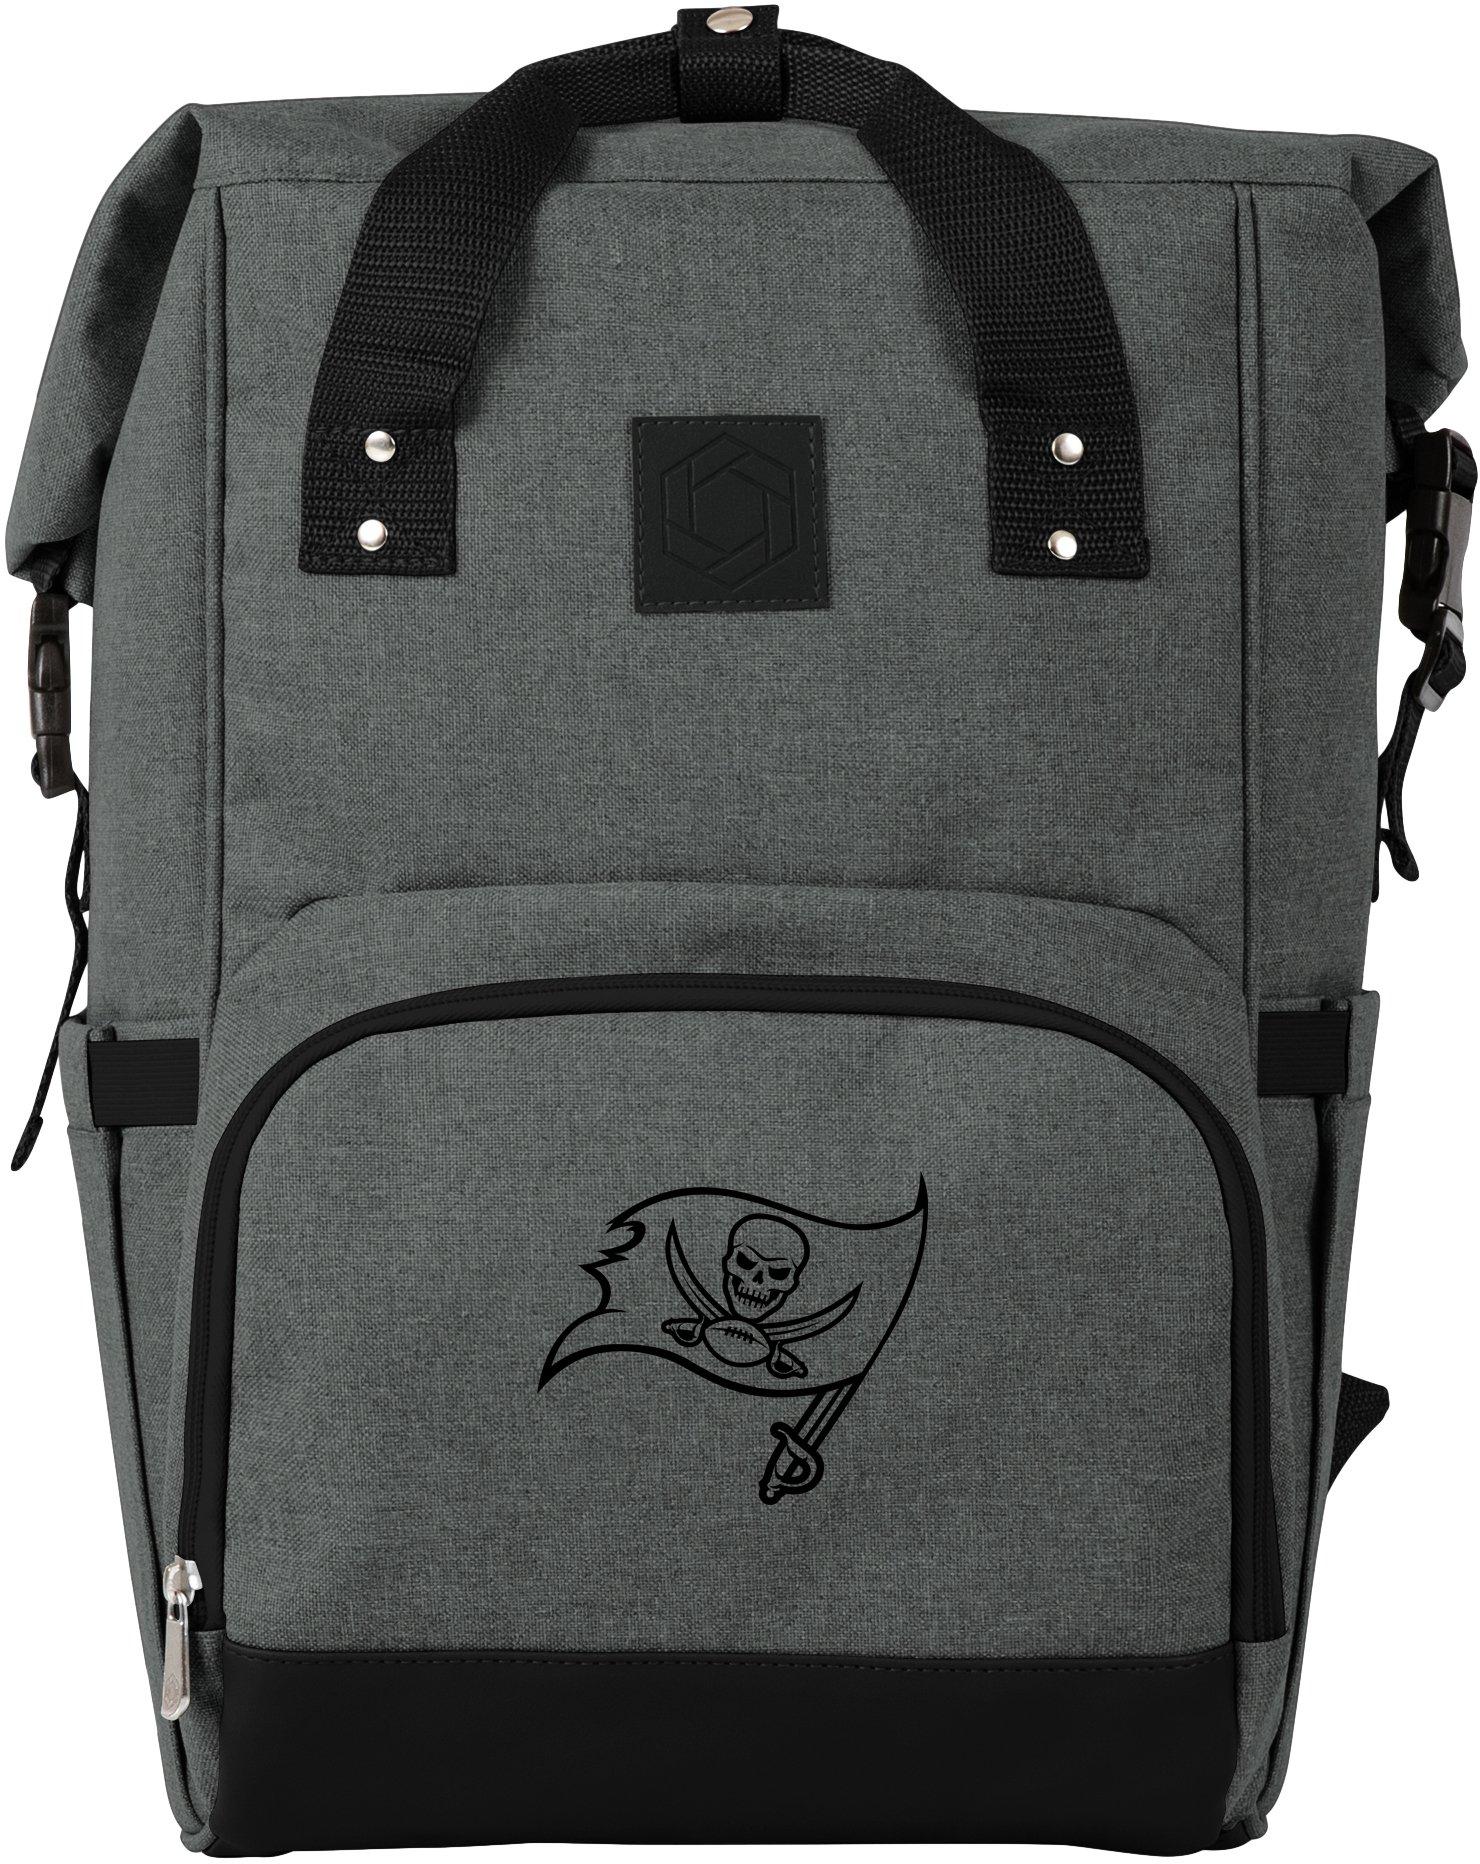 Tampa Bay Buccaneers On The Go Roll-Top Cooler